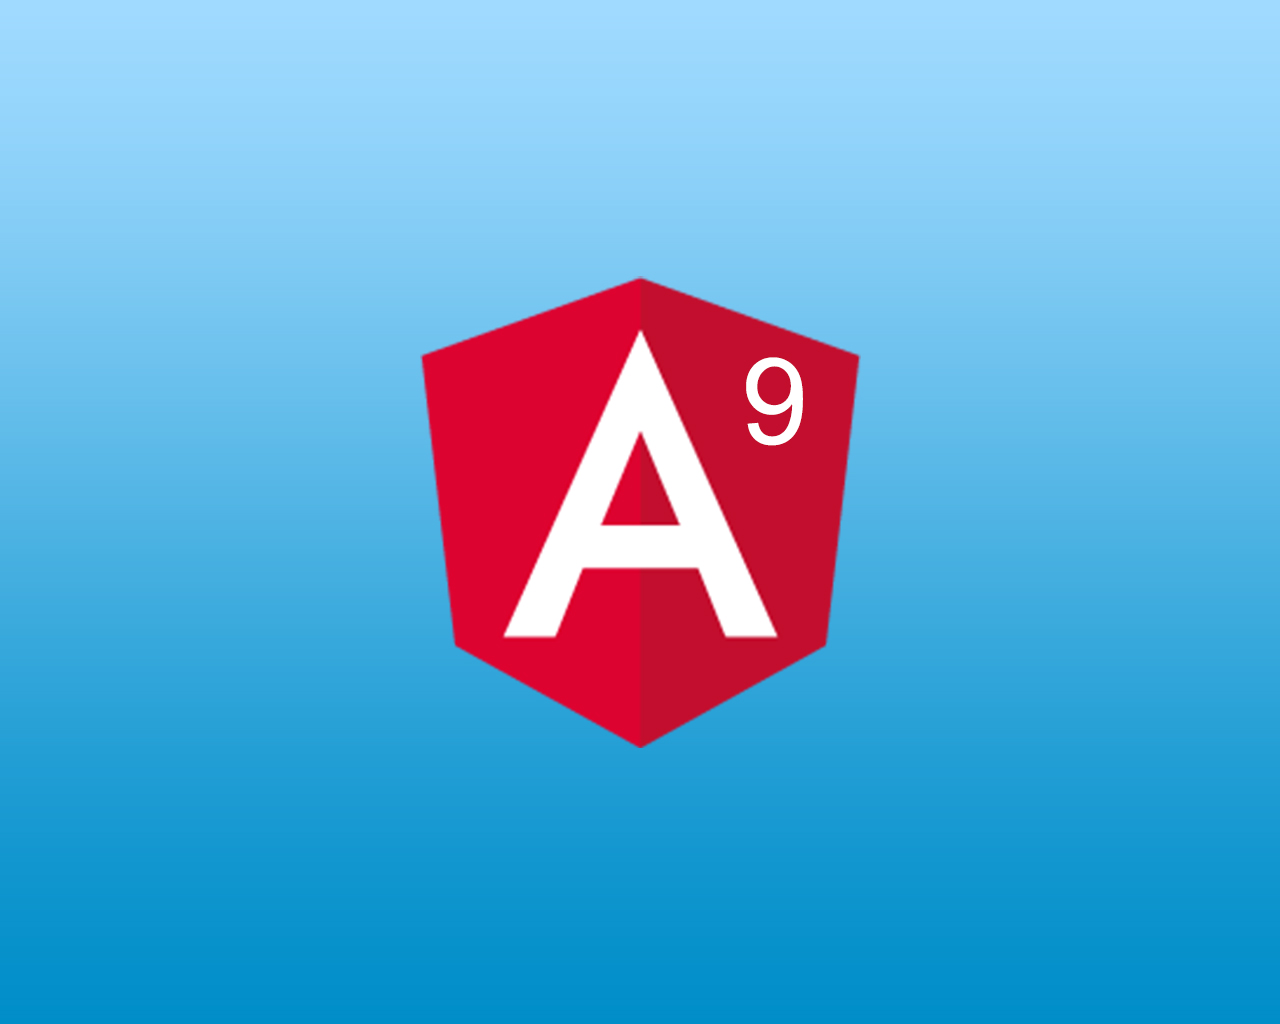 On the way to Angular 9: Not only bug fixes in Angular 8.1